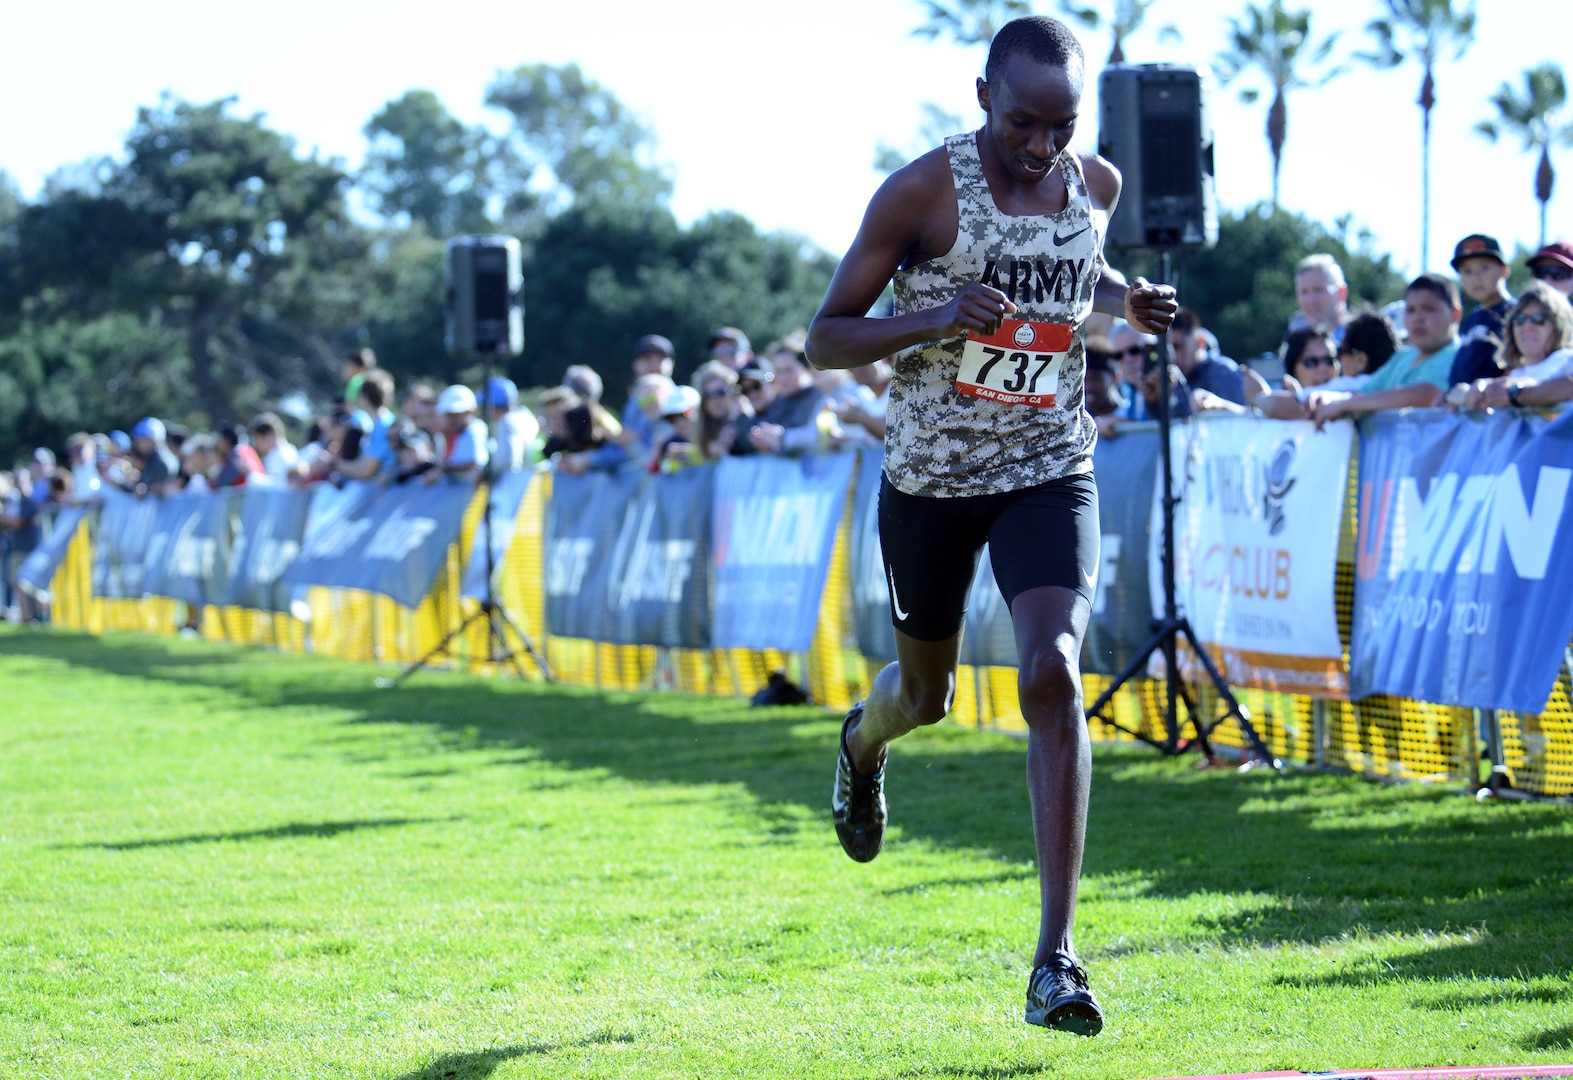 Army Spc. Lawi LaLang crosses the finish line of the Armed Forces Cross Country Championship at Mission Bay Park in San Diego, Jan. 18, 2020, with a time of 31:00 to take third place. The race was run concurrently with the USA Track and Field senior men 10K and LaLang took bronze in both.